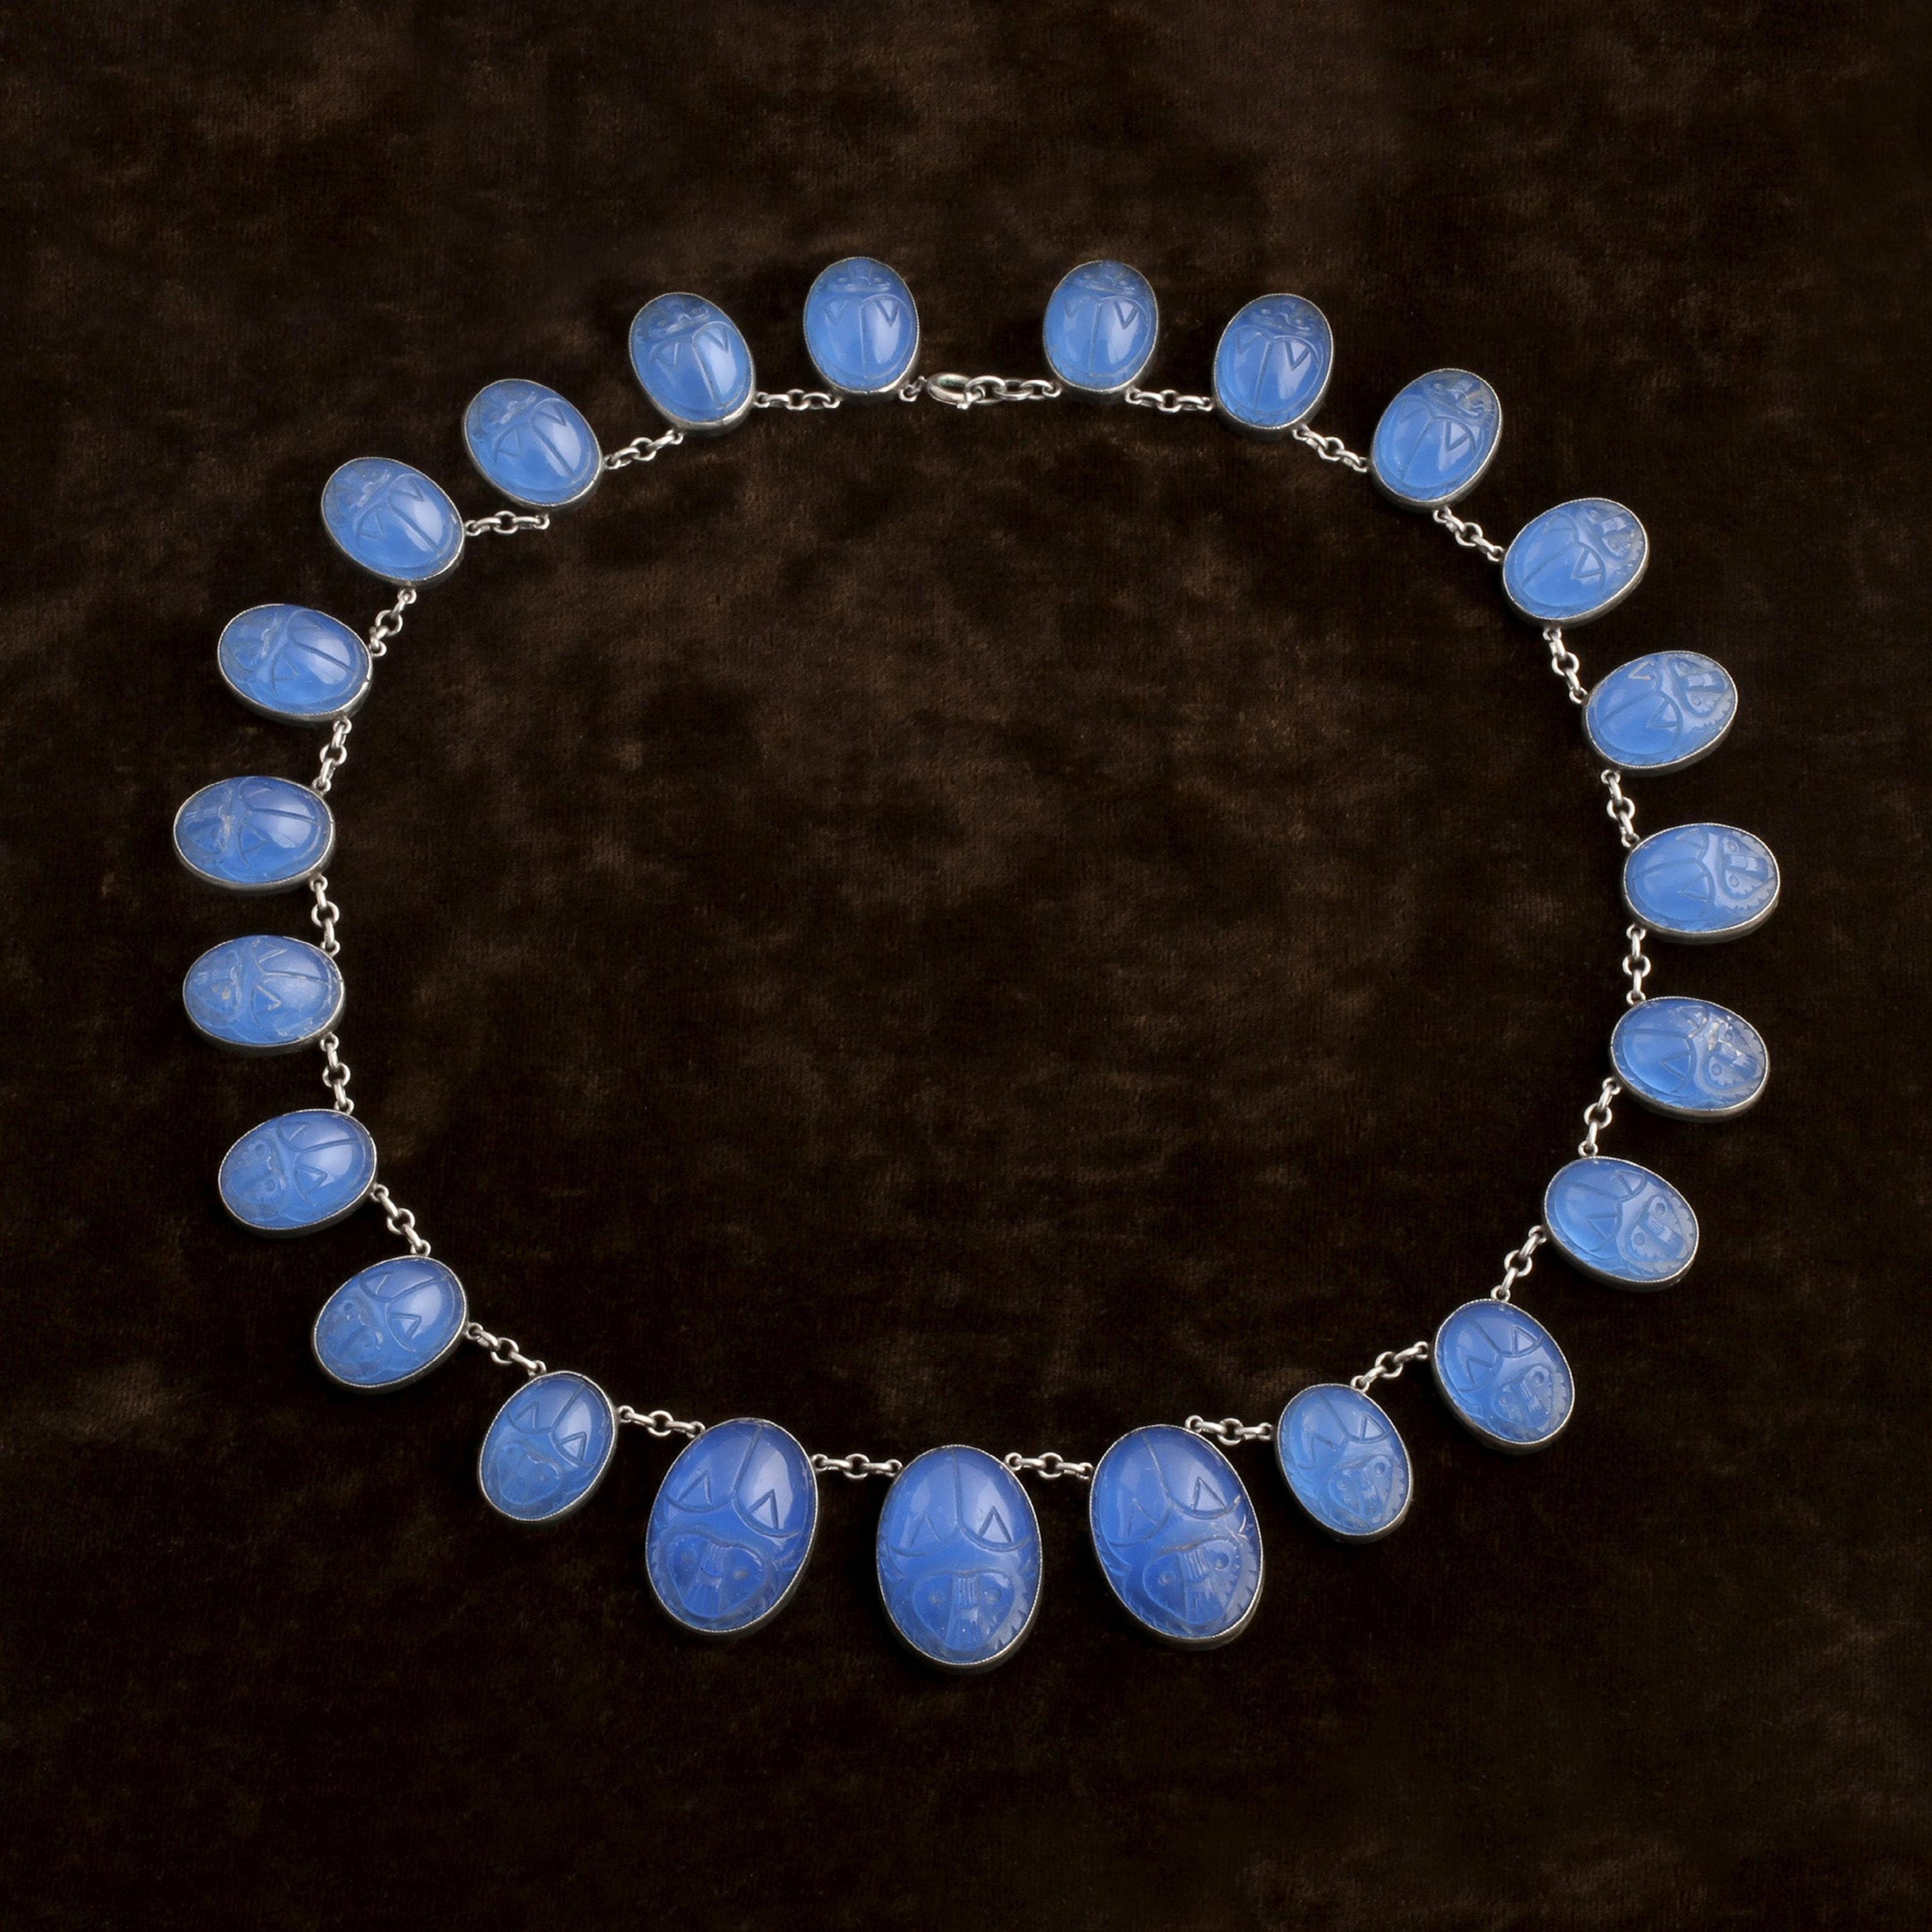 Egyptian Revival Blue Glass Scarab Necklace